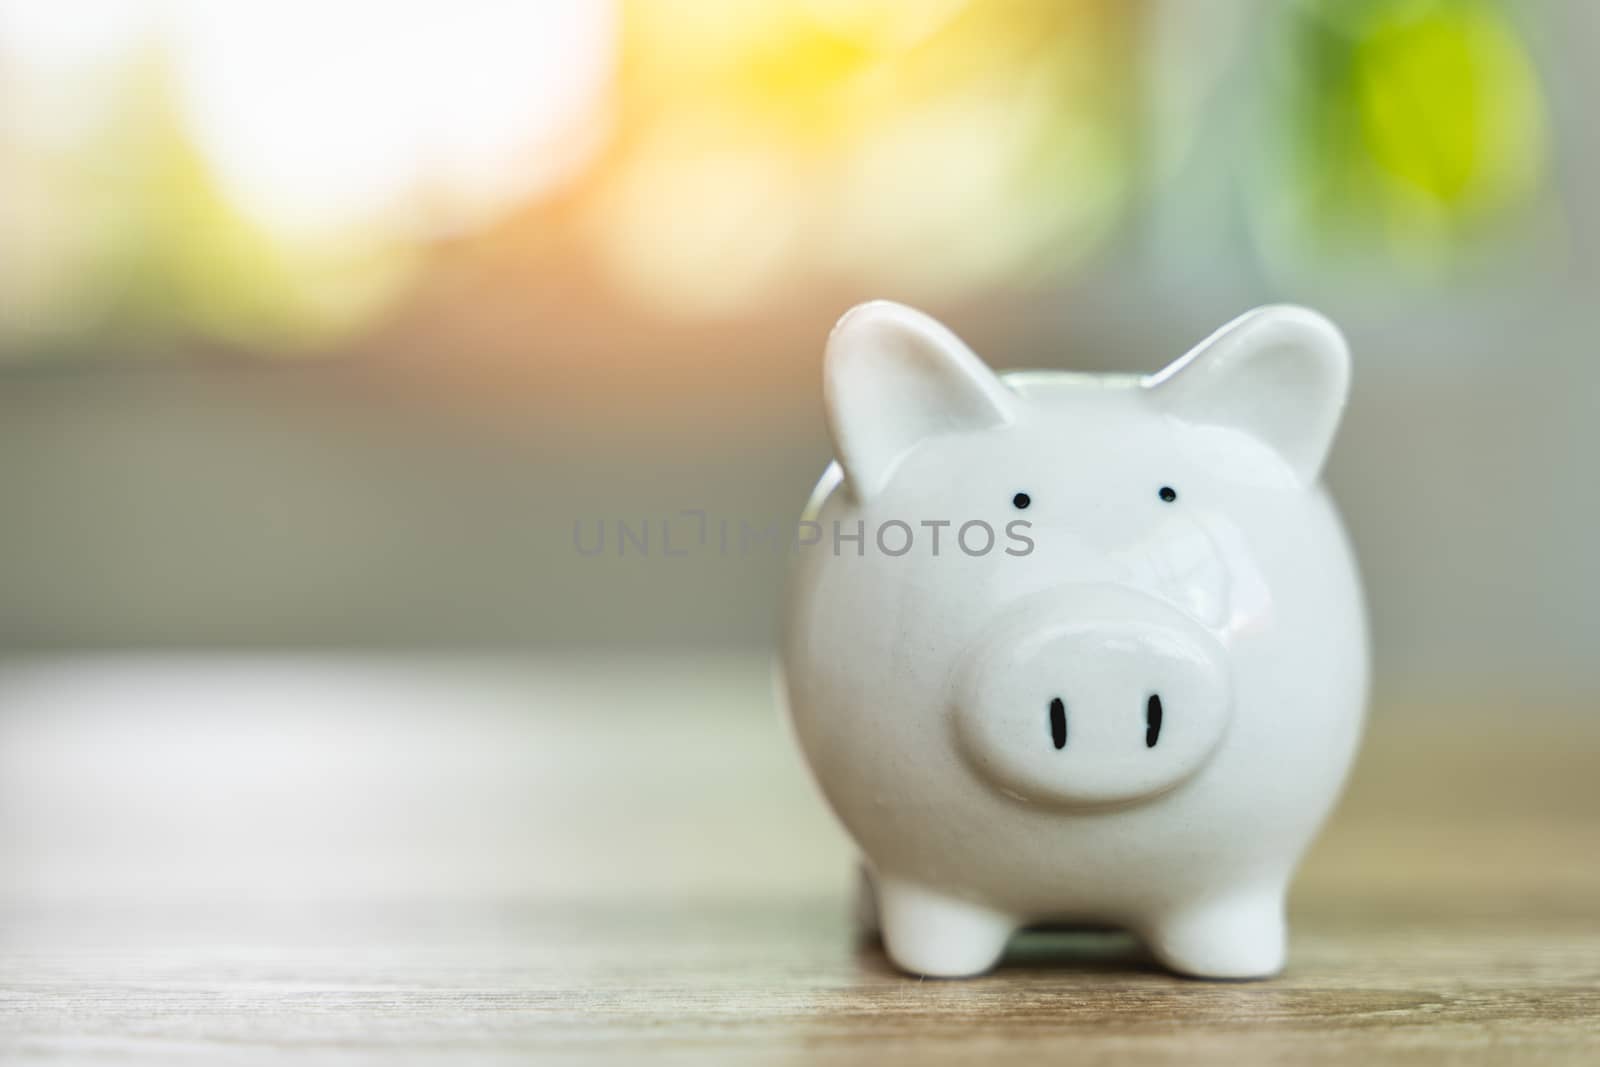 Money savings concepts Piggy bank symbol of saving money on wooden table with sunlight bokeh blur background and copy space